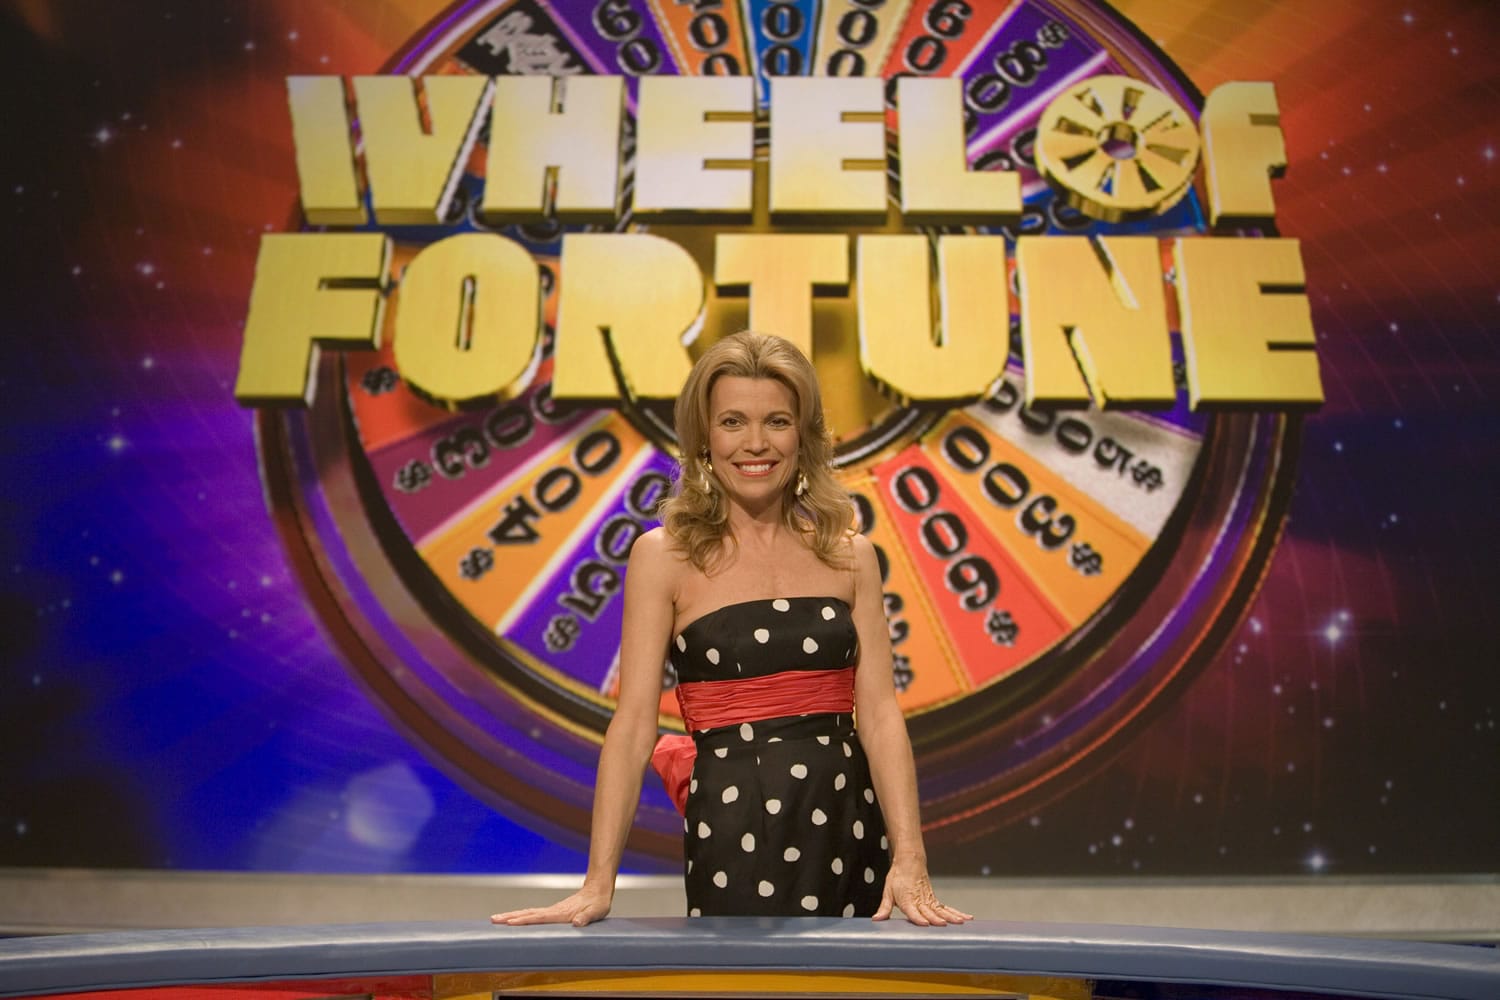 Vanna White, South Carolina native and co-host of &quot;Wheel of Fortune,&quot; poses on the set Friday, Jan. 12, 2007, in North Charleston, S.C. South Carolina's most famous letter-turner returned home Friday as White and co-host Pat Sajak spun the &quot;Wheel of Fortune&quot; in her native state.